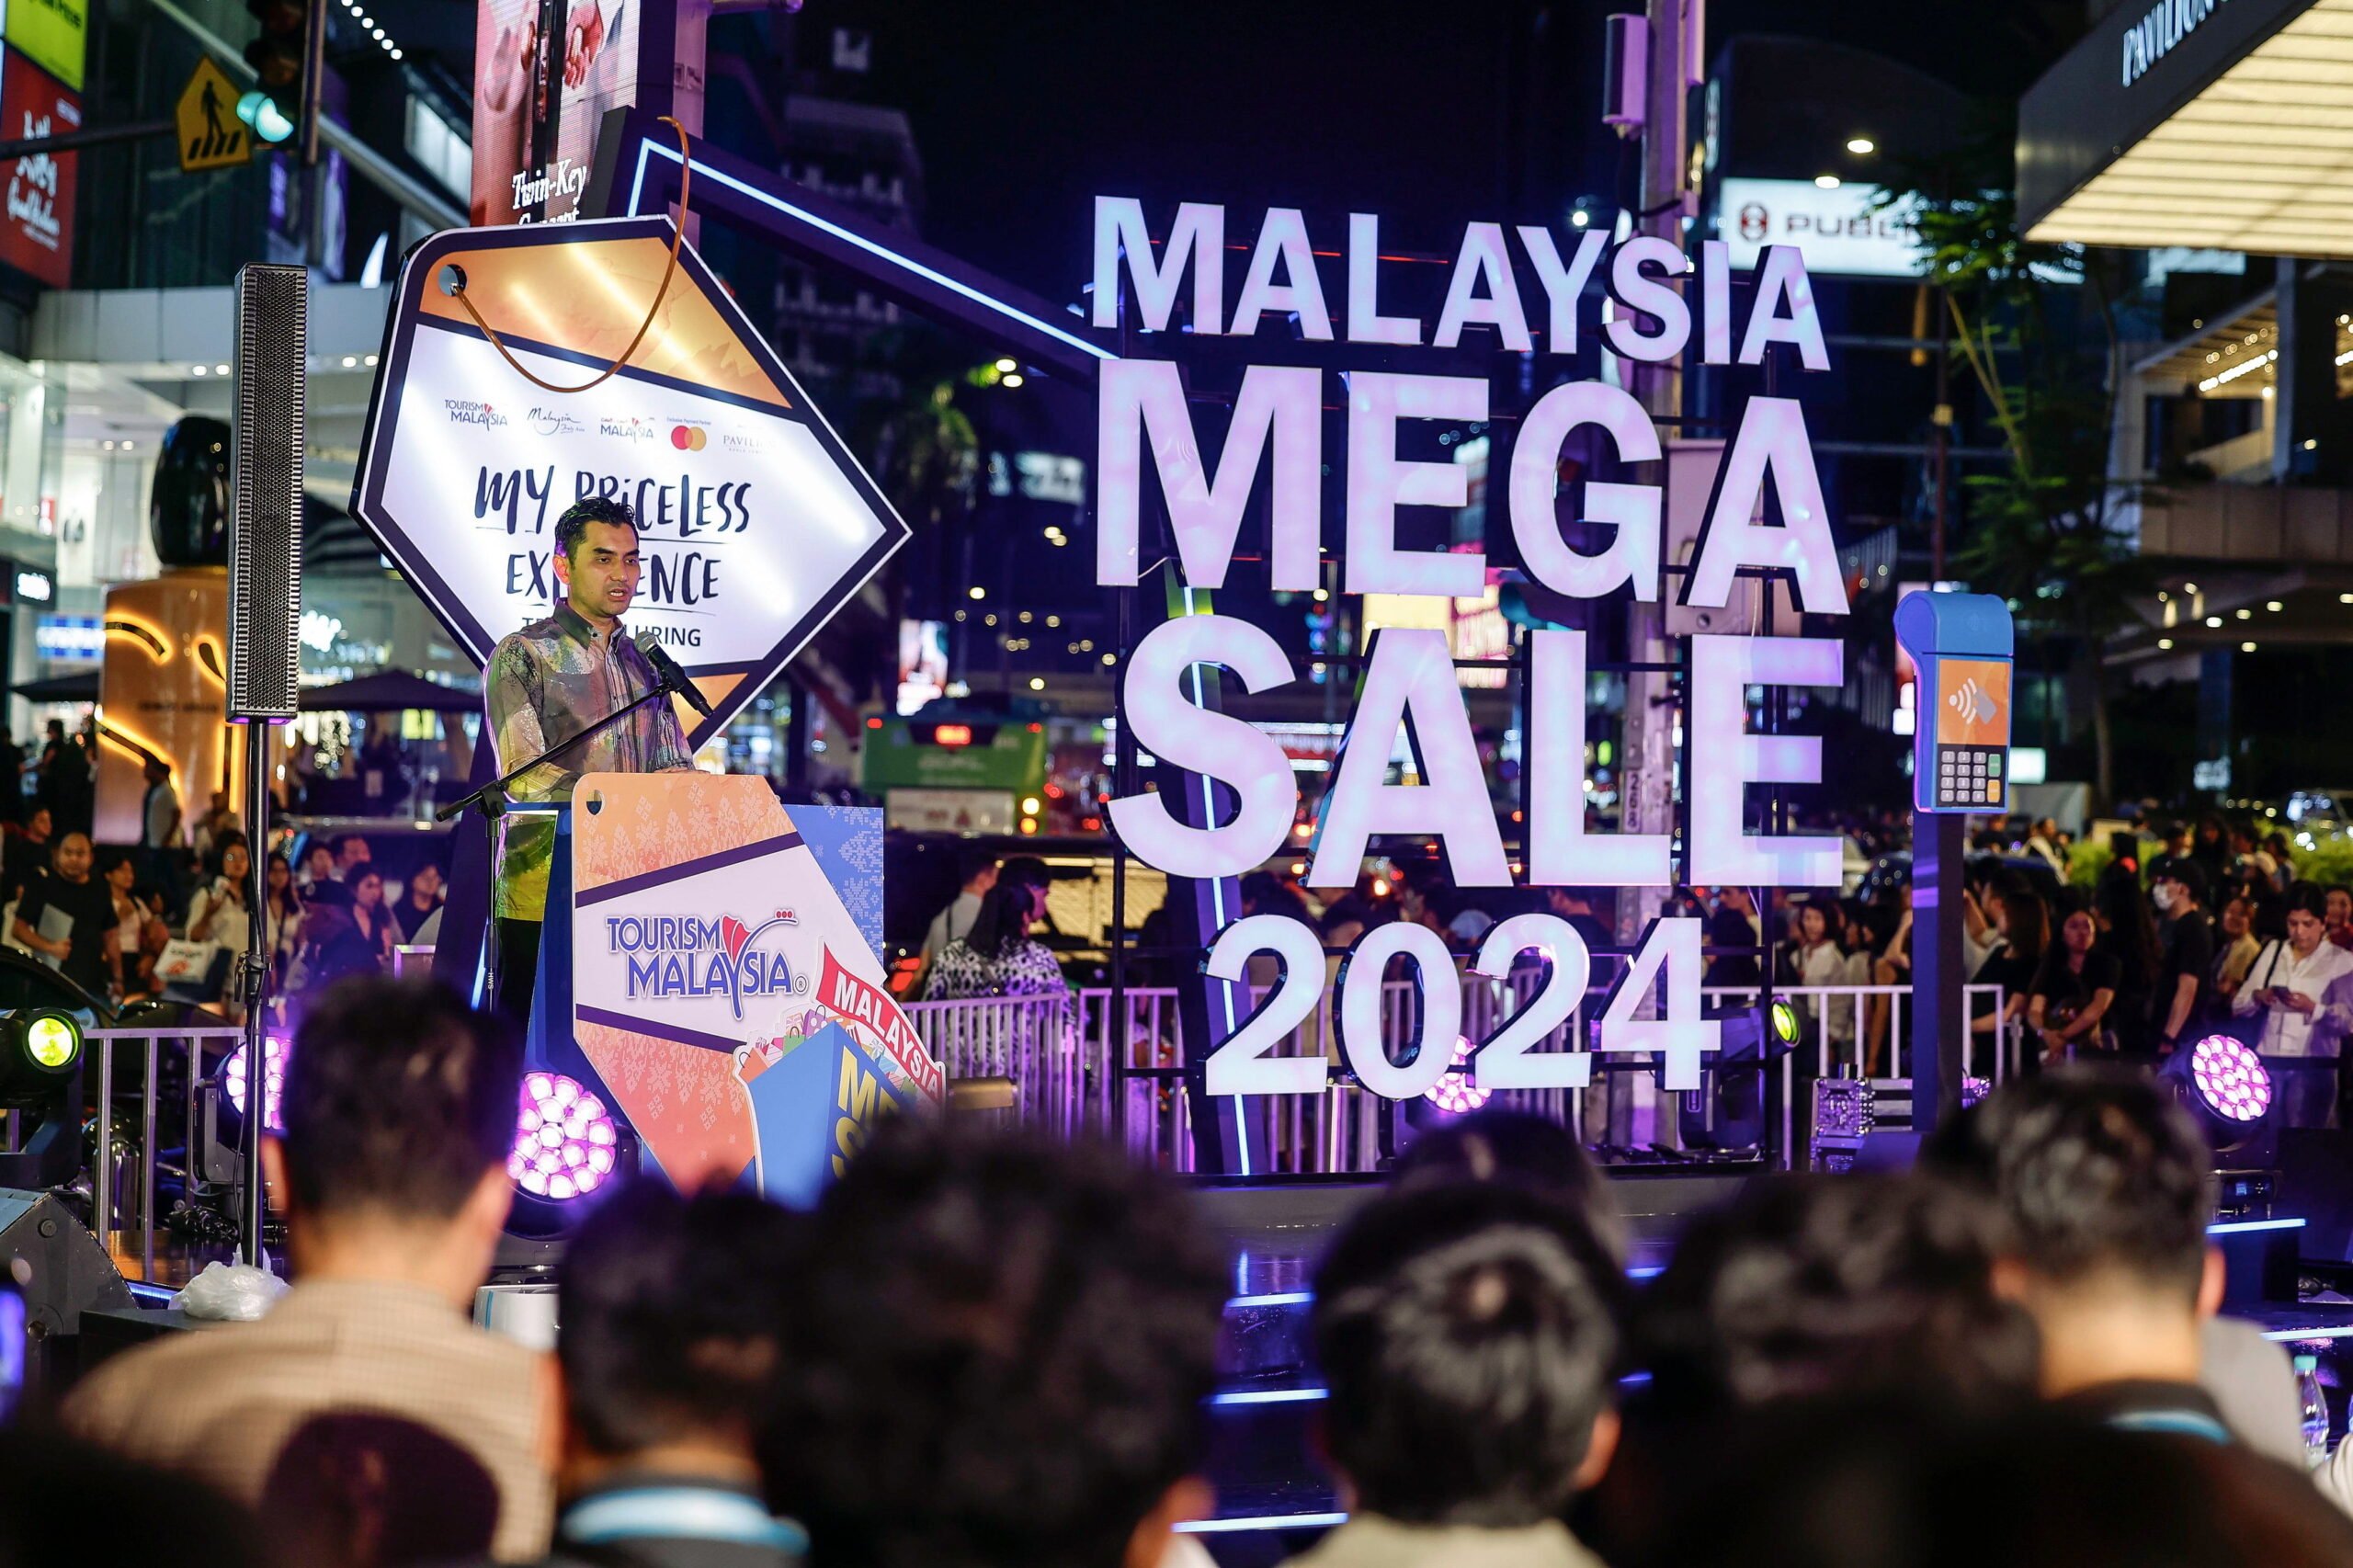 Malaysia Mega Sale returns from June 15 to July 31 with discounts up to 85%